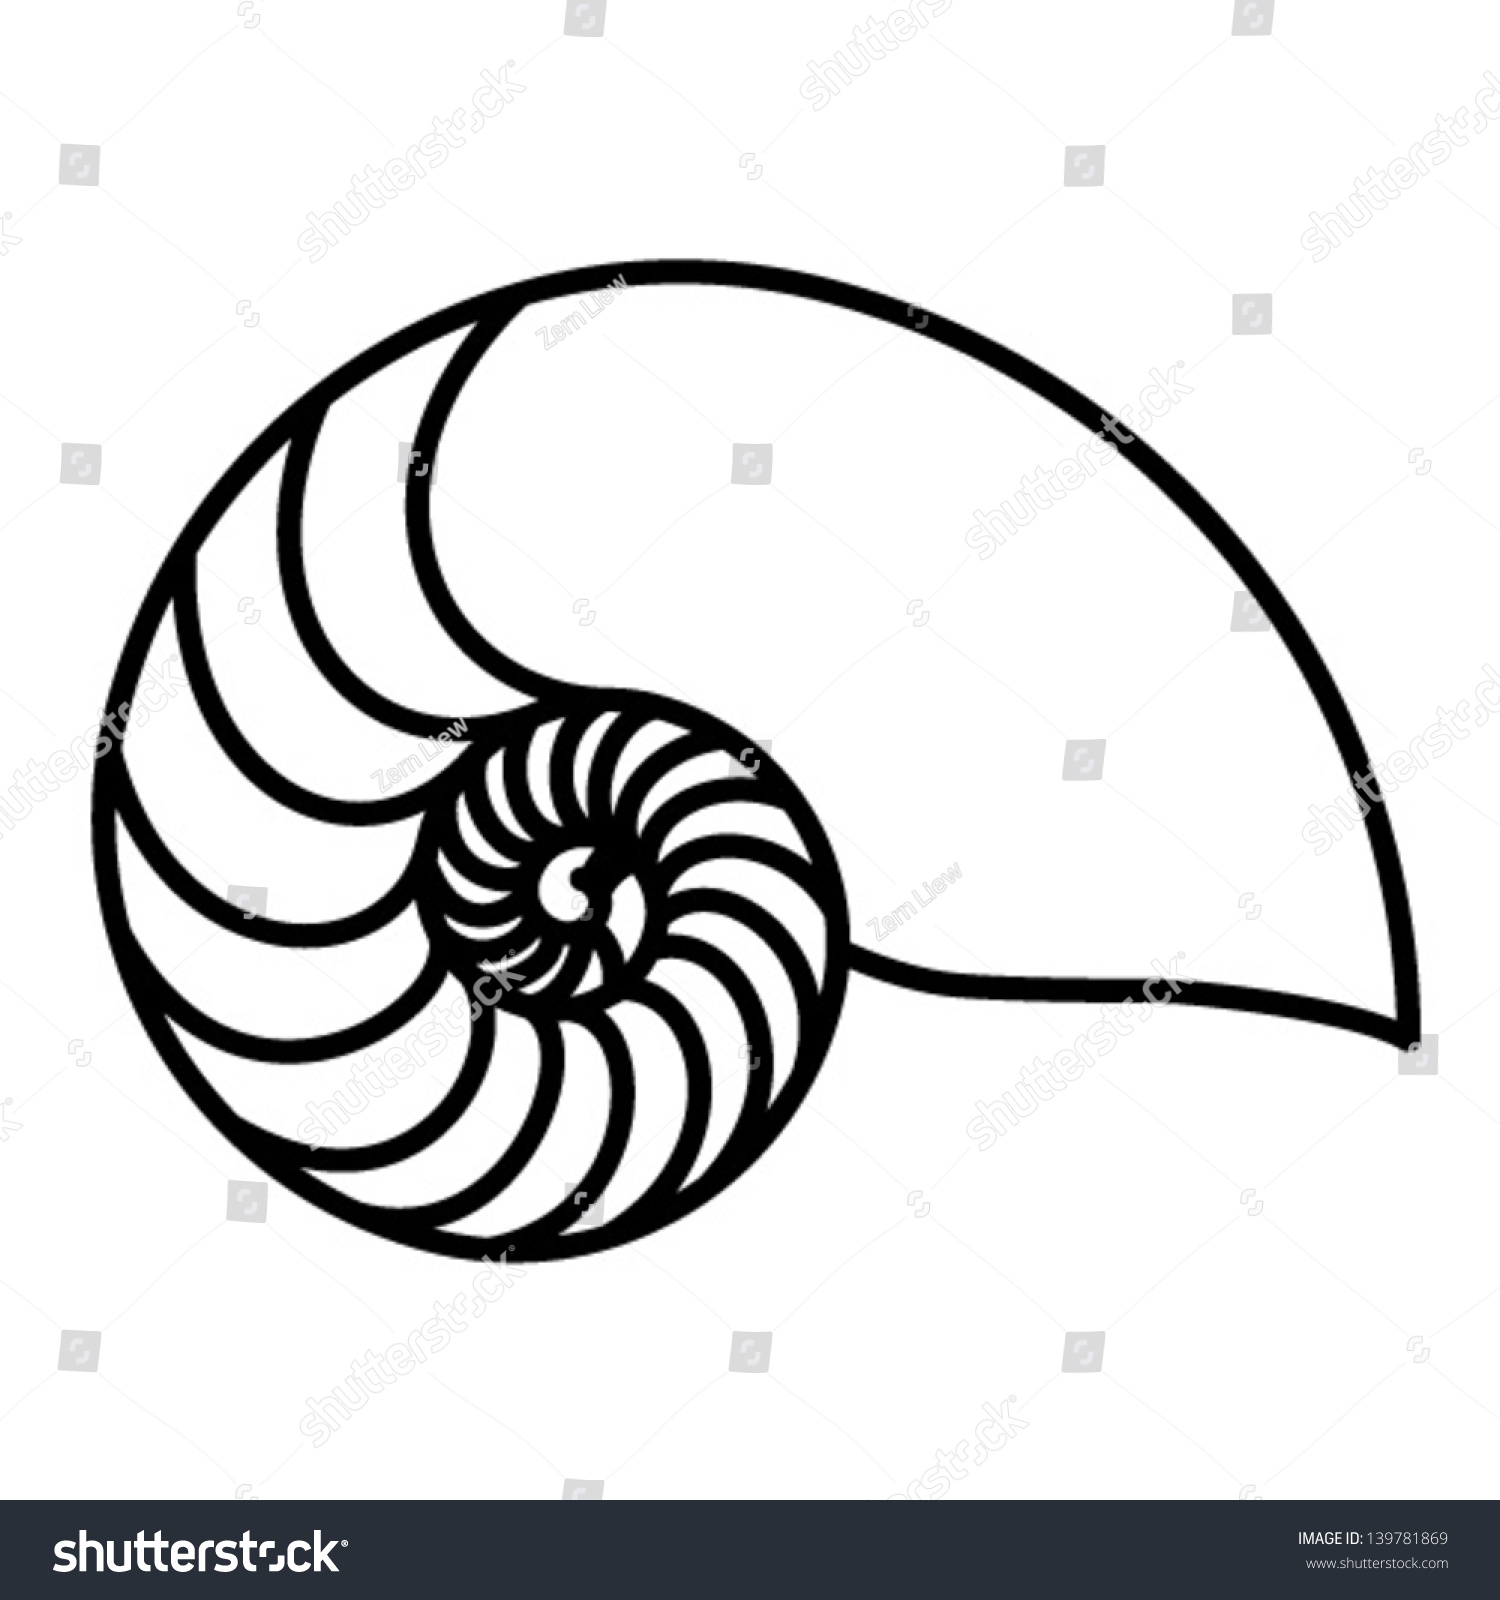 SVG of Outline of a nautilus shell. svg